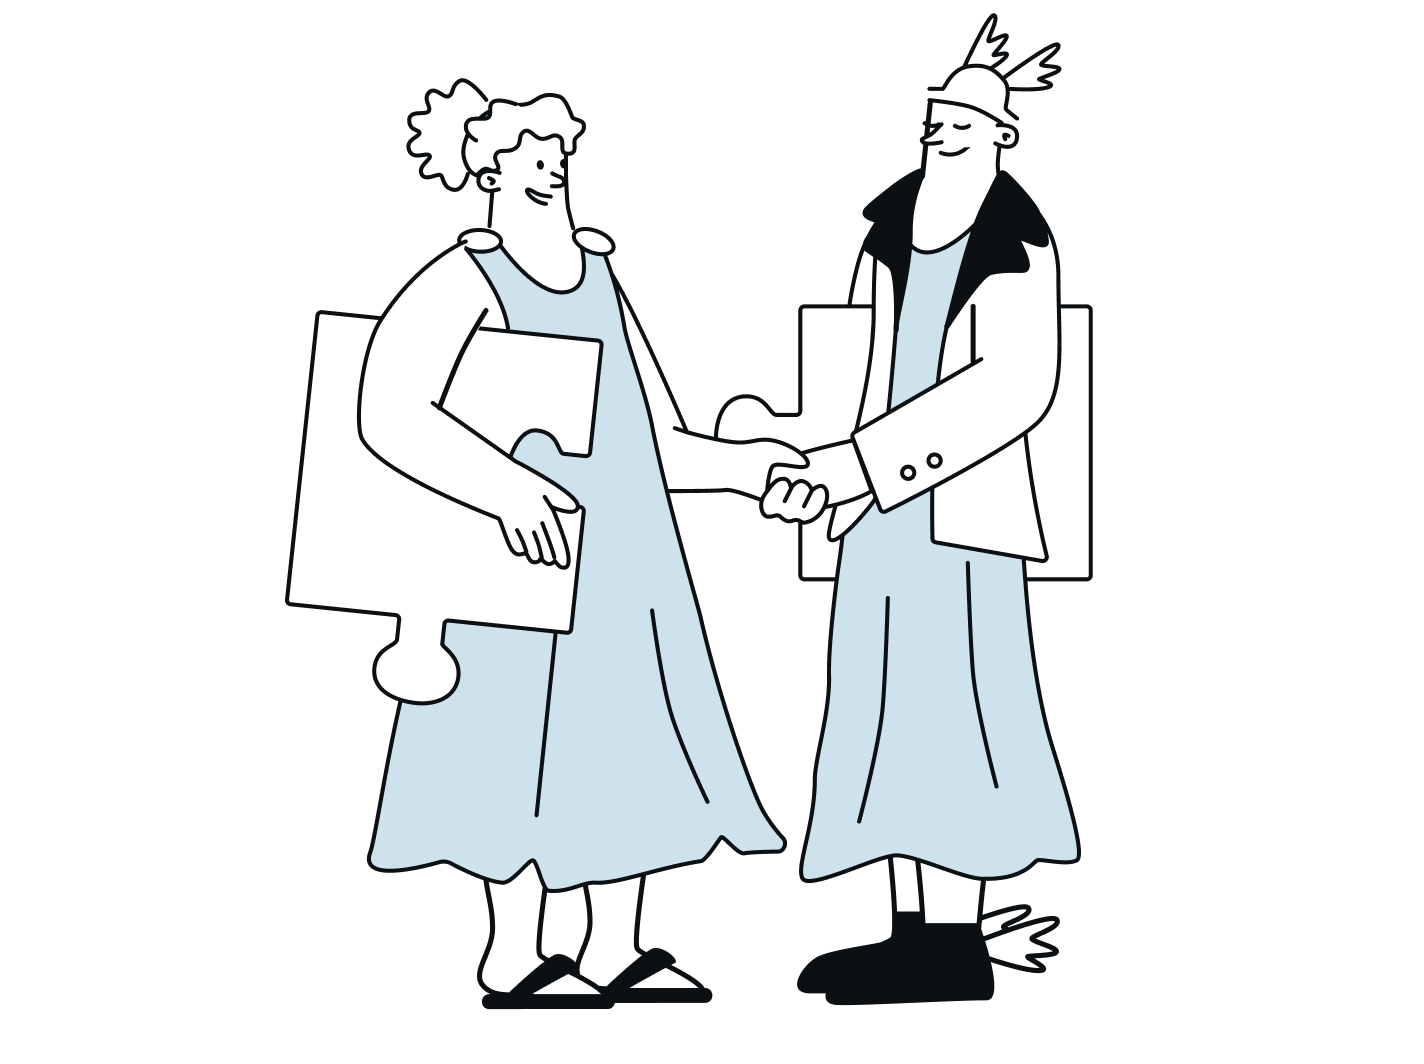 Artemis and Hermes shake hands while holding big puzzle pieces